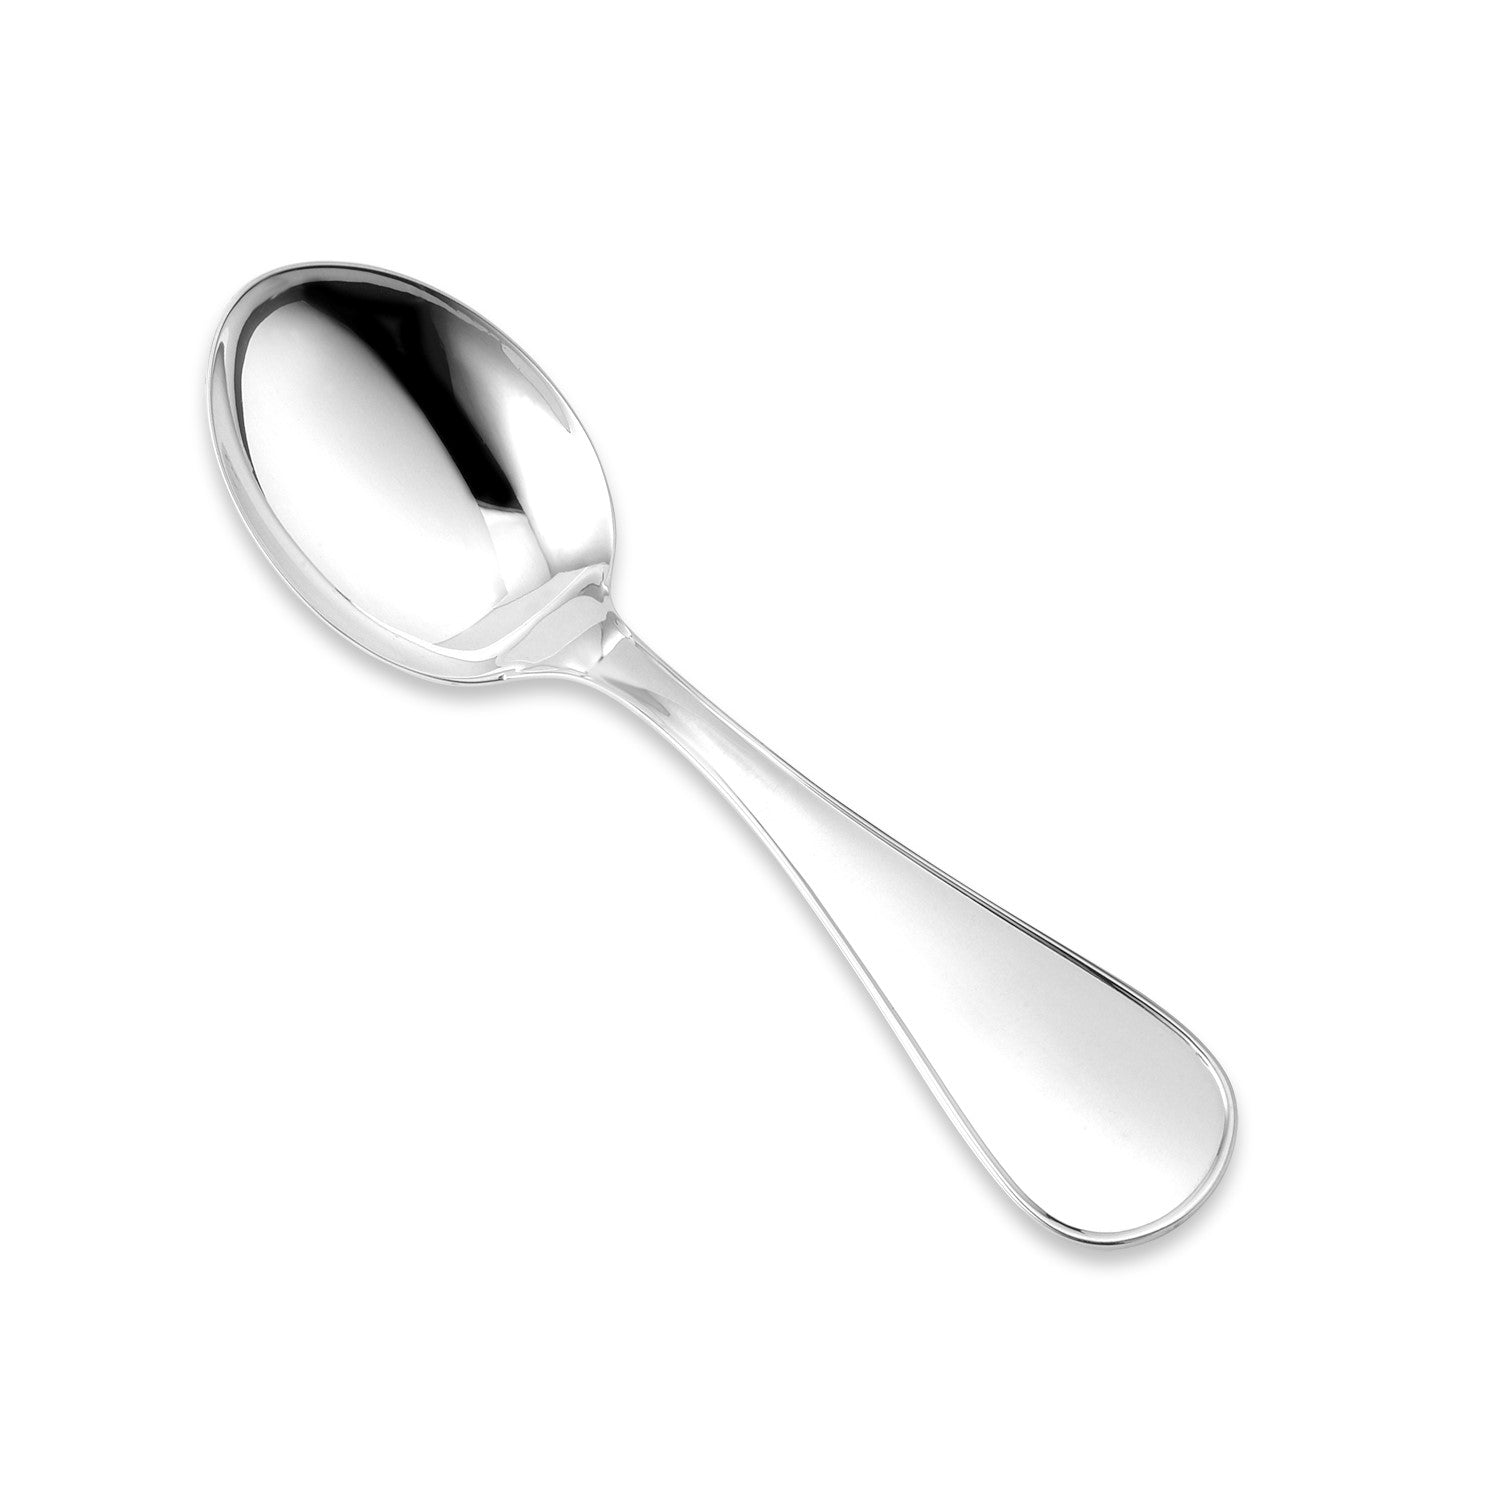 Sterling Silver 925 baby spoon displayed on a pristine white background